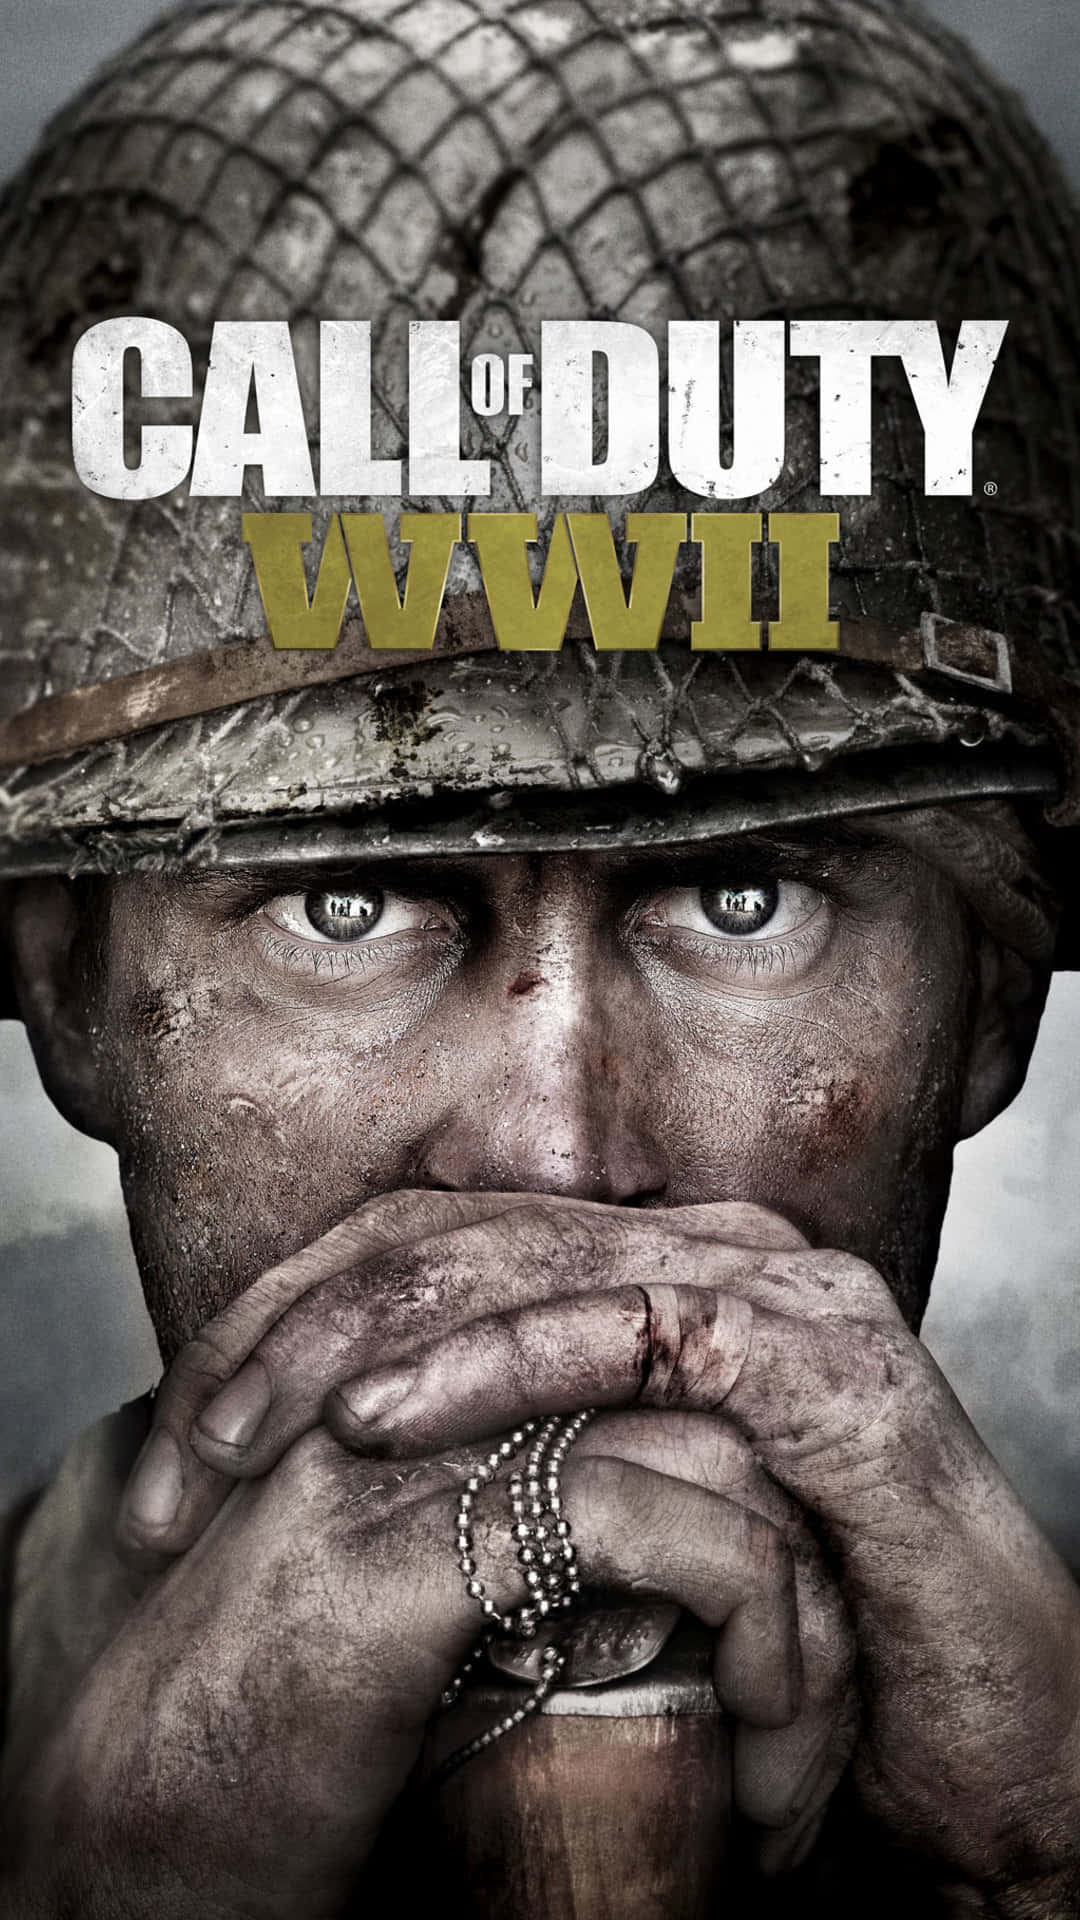 Ww2 Iphone Call Of Duty Wallpaper